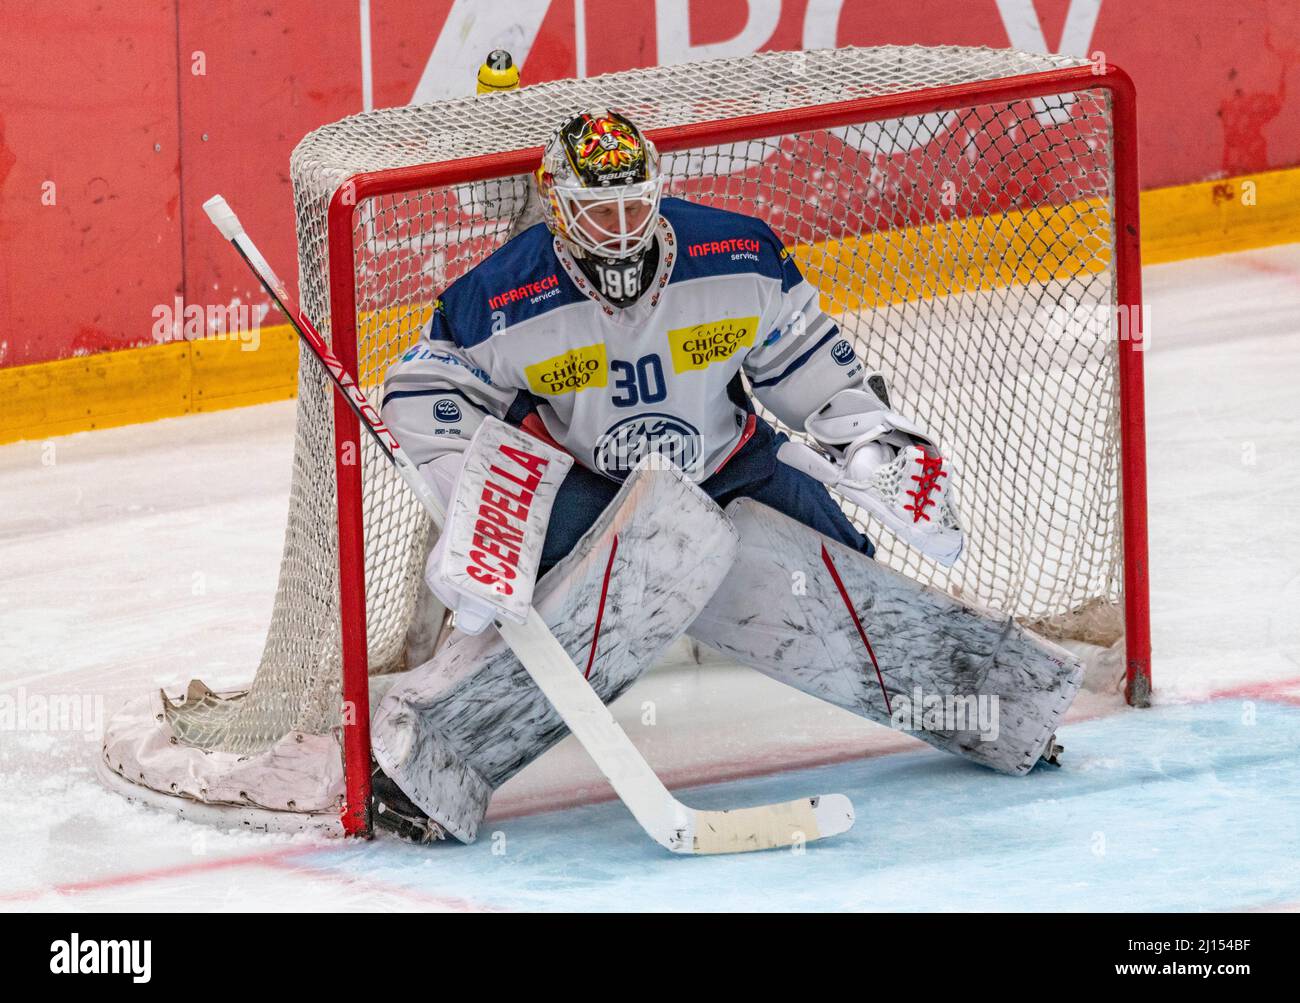 Lausanne, Vaudoise Arena, Switzerland. 22nd Mar, 2022: Janne Juvonen (goalkeeper) of HC Ambri-Piotta (30) is in action during the Pre-playoffs, Acte 3 of the 2021-2022 Swiss National League Season with the Lausanne HC and HC Ambri-Piotta. Credit: Eric Dubost/Alamy Live News Stock Photo